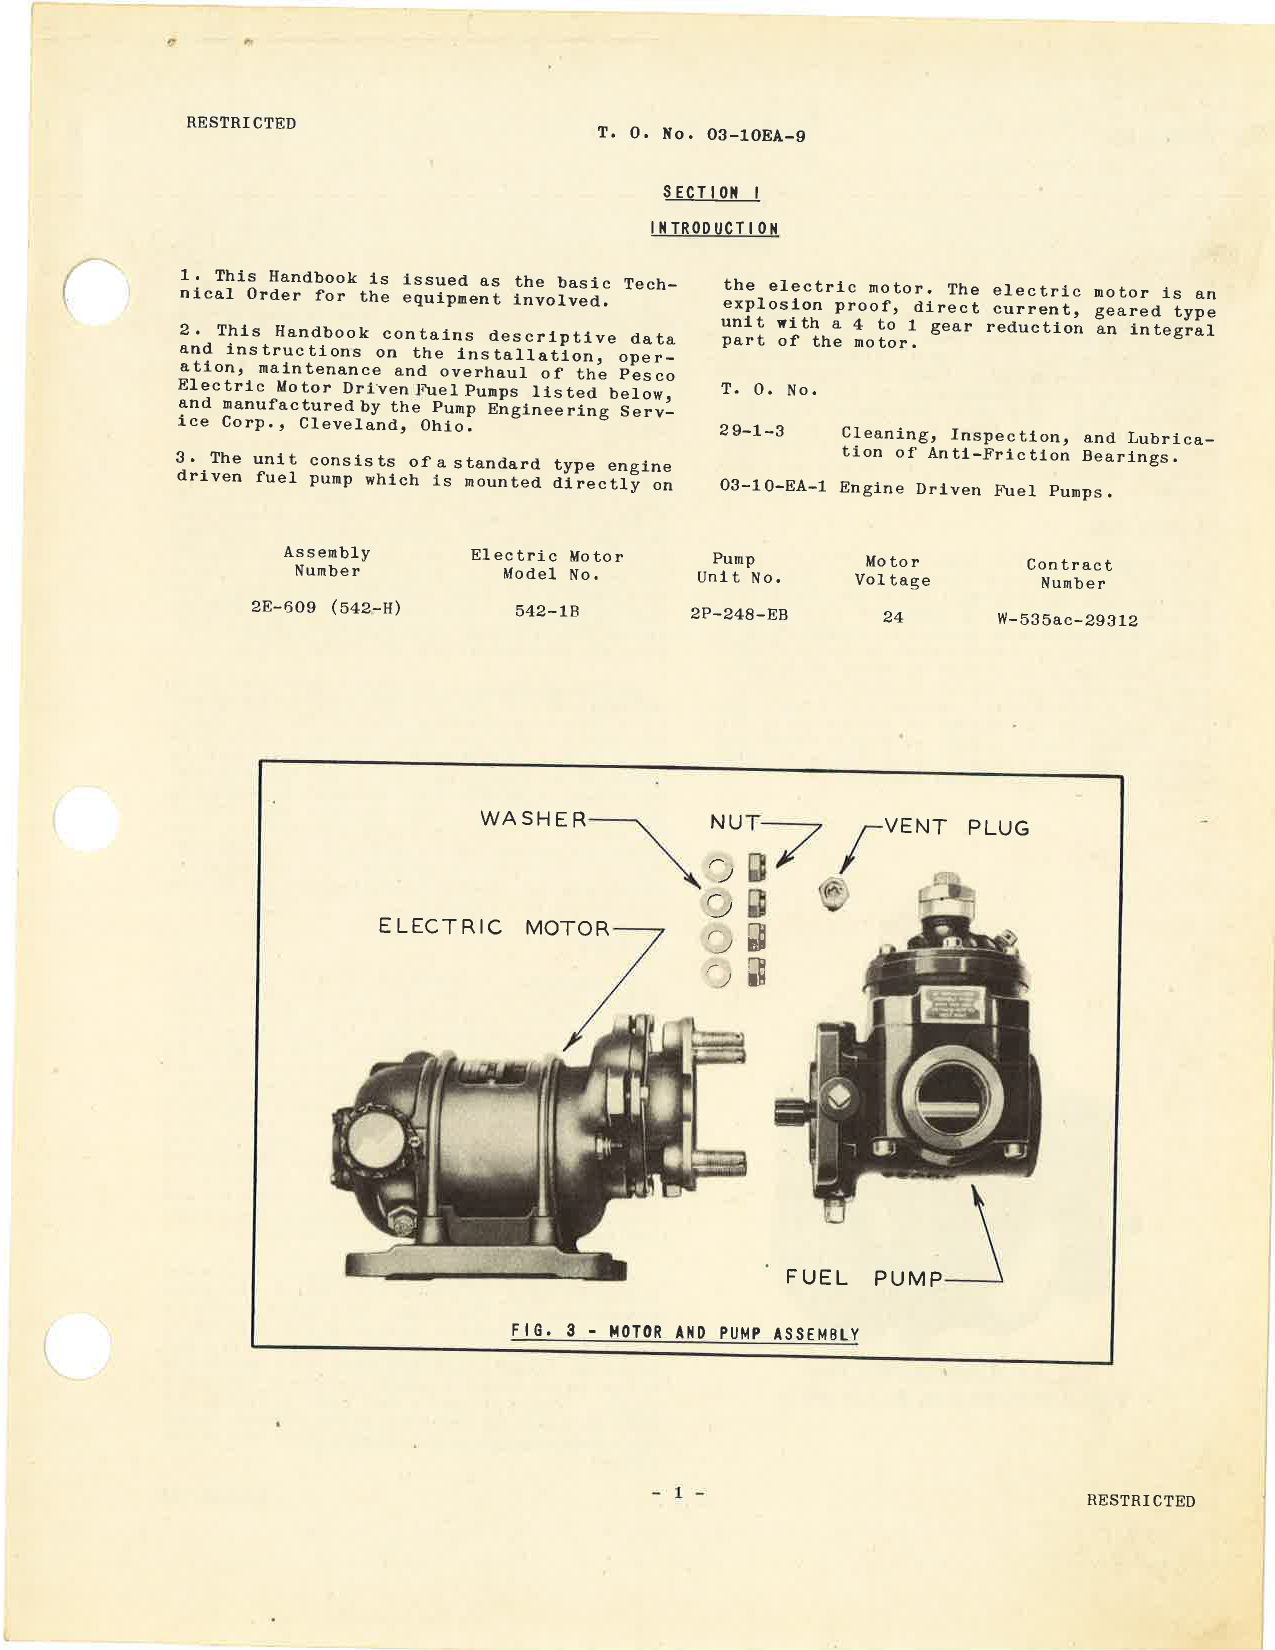 Sample page 7 from AirCorps Library document: Handbook of Instructions with Parts Catalog for Electric Motor Driven Fuel Pumps